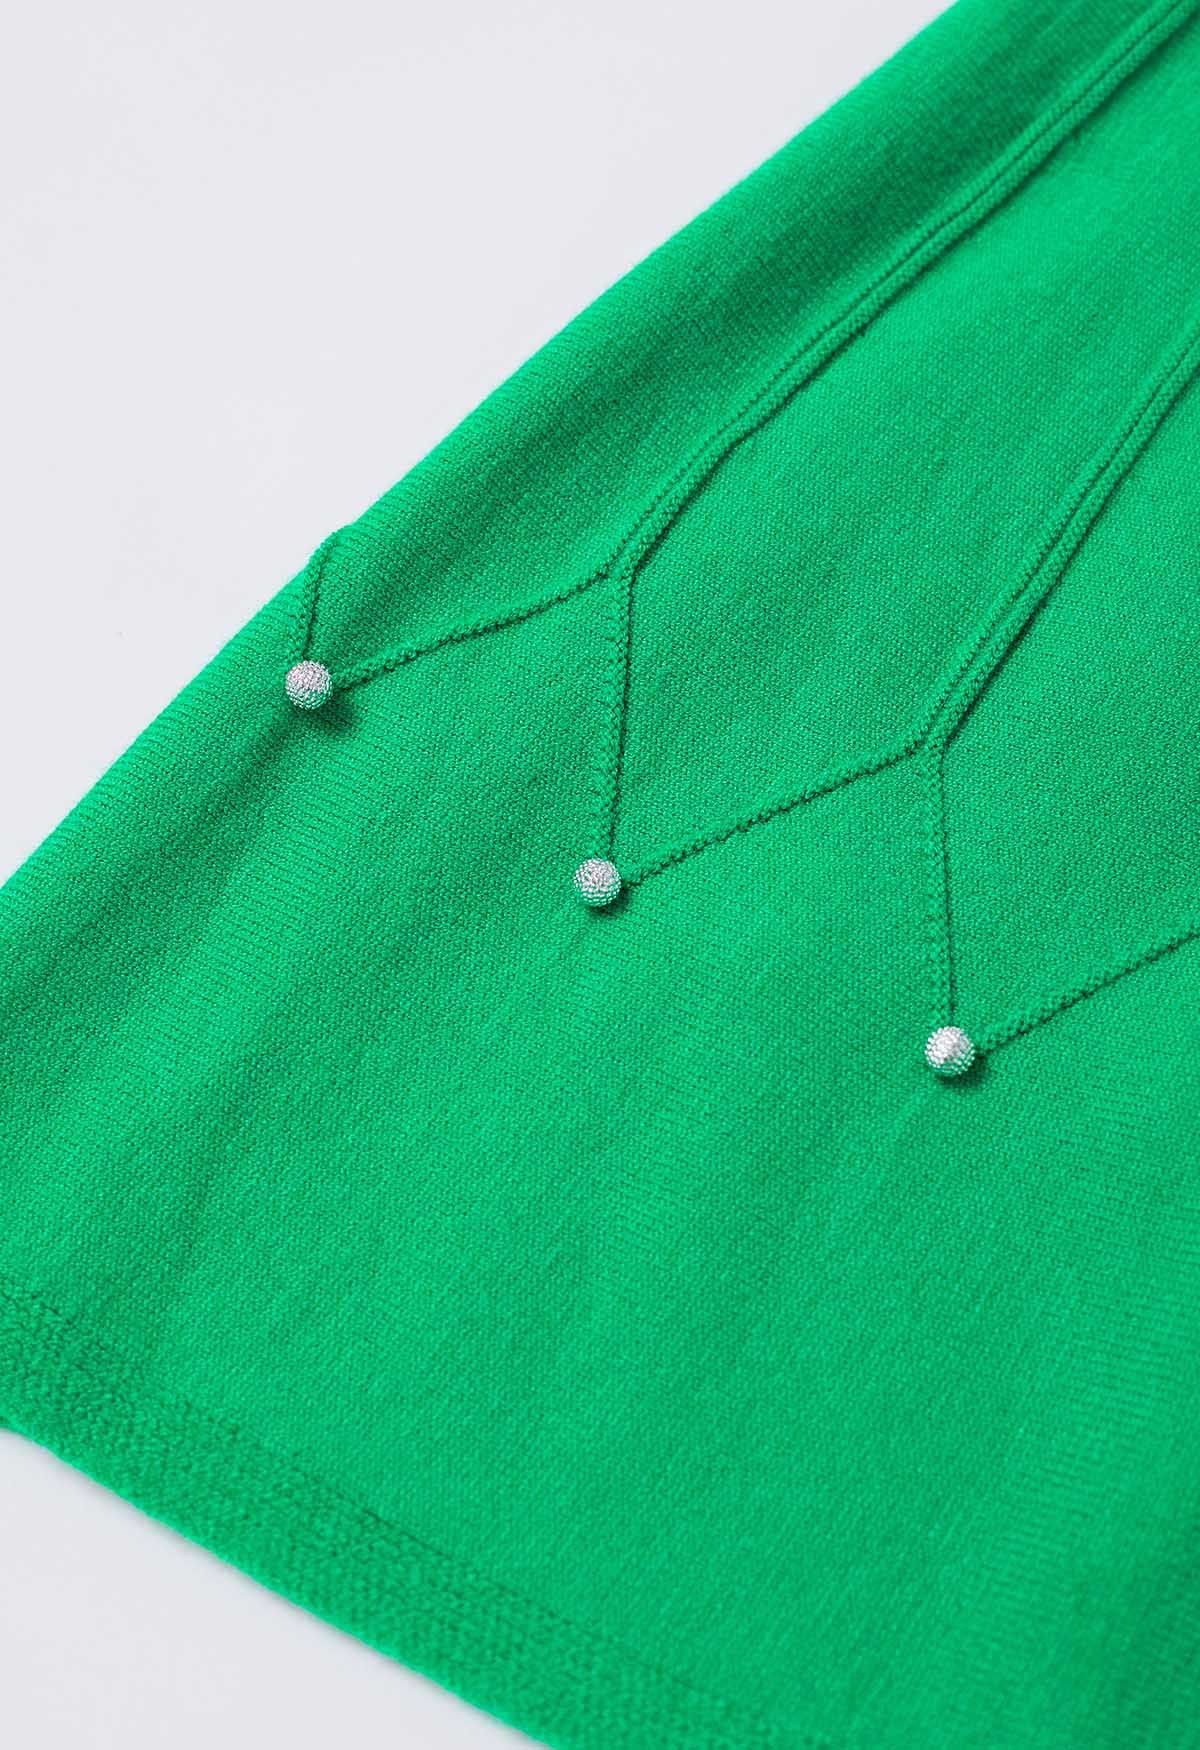 Silver Bead Embellished Seam Knit Skirt in Green